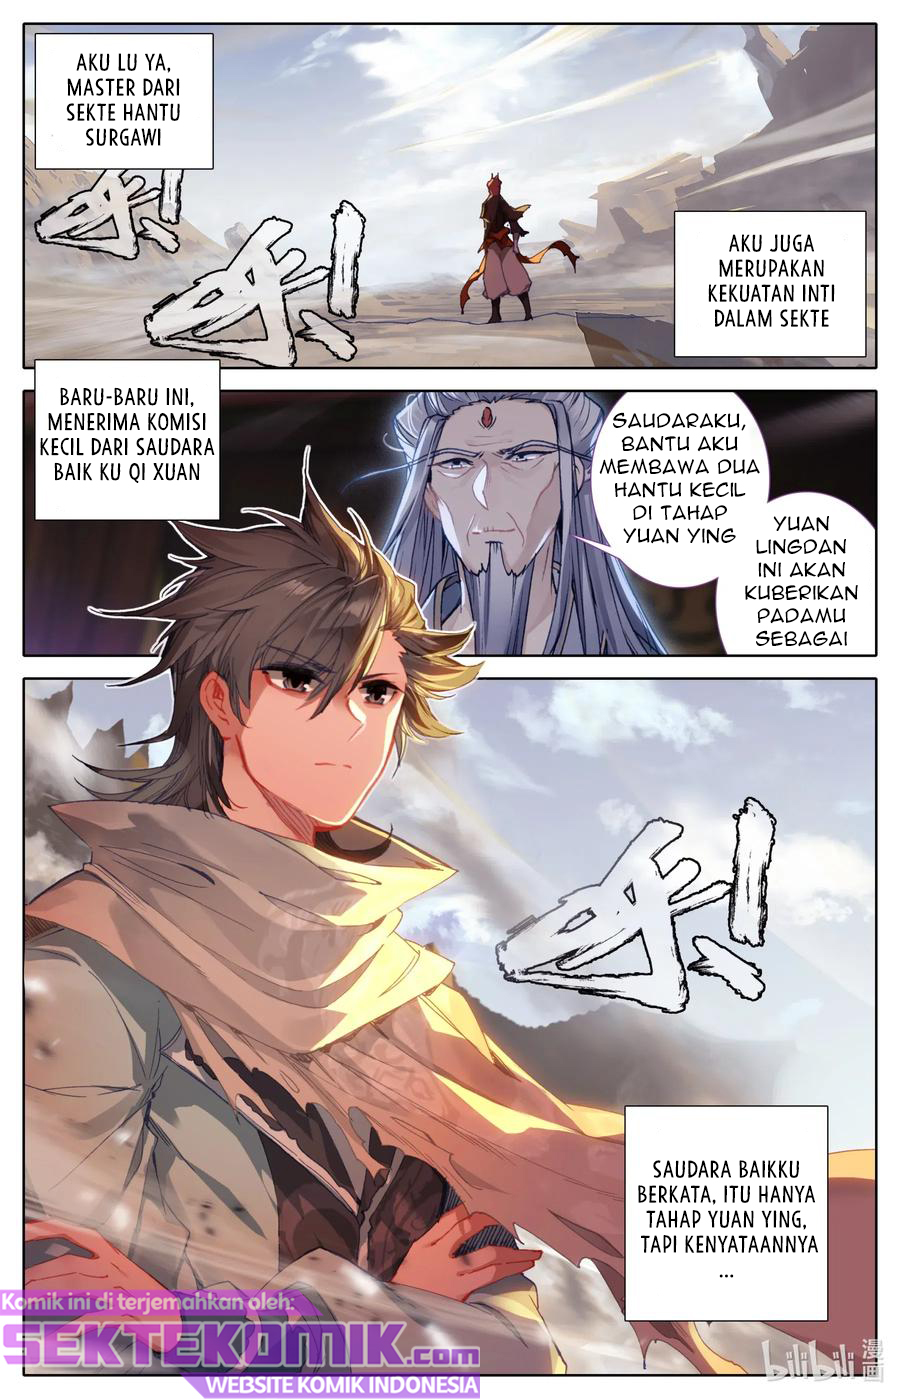 Mortal Cultivation Fairy World Chapter 29